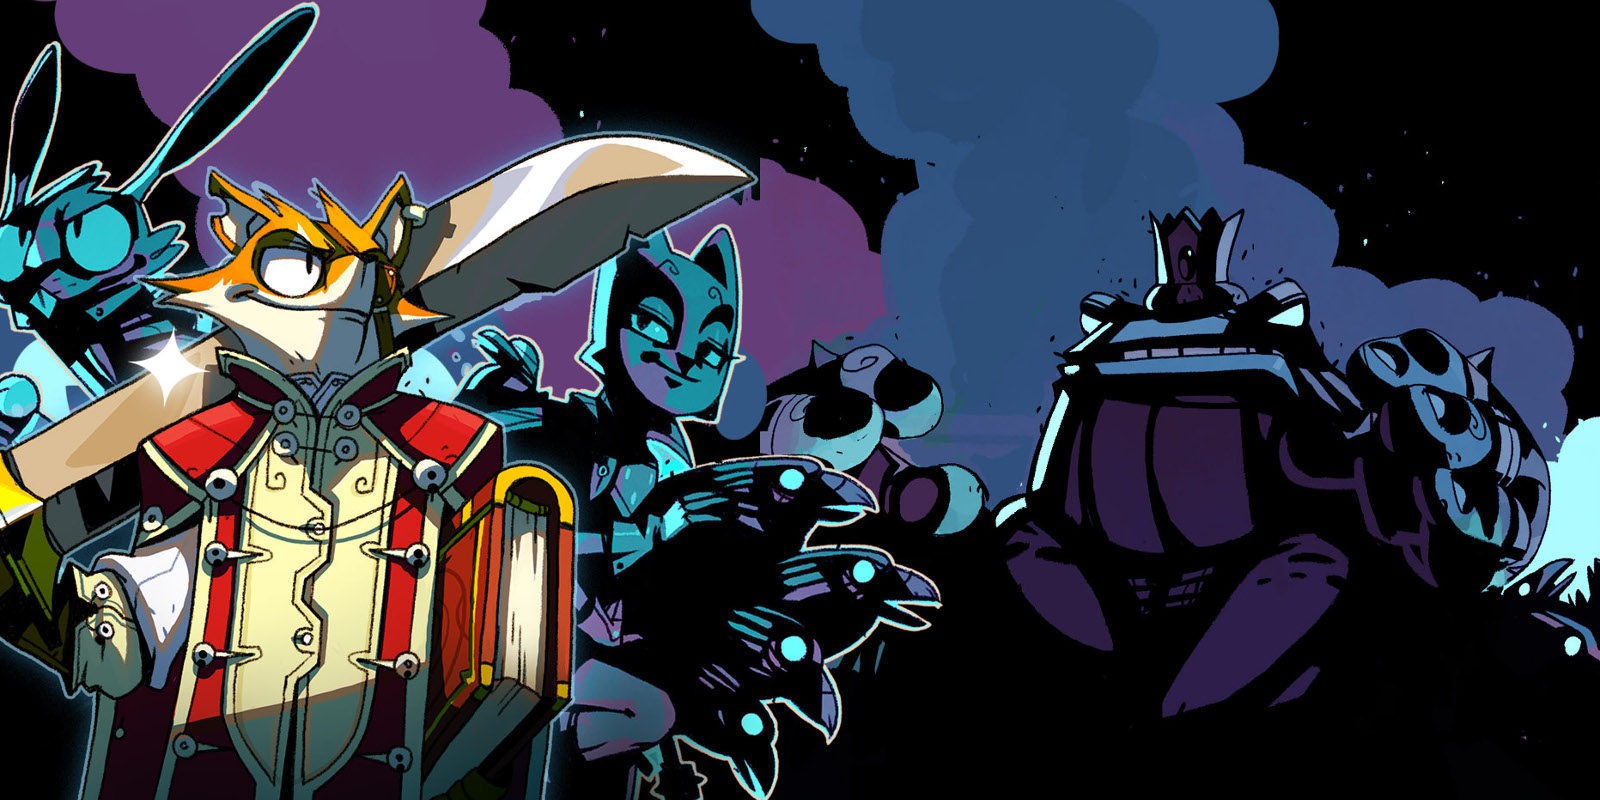 Análisis 'Stories: The Path of Destinies' PS4 y PC